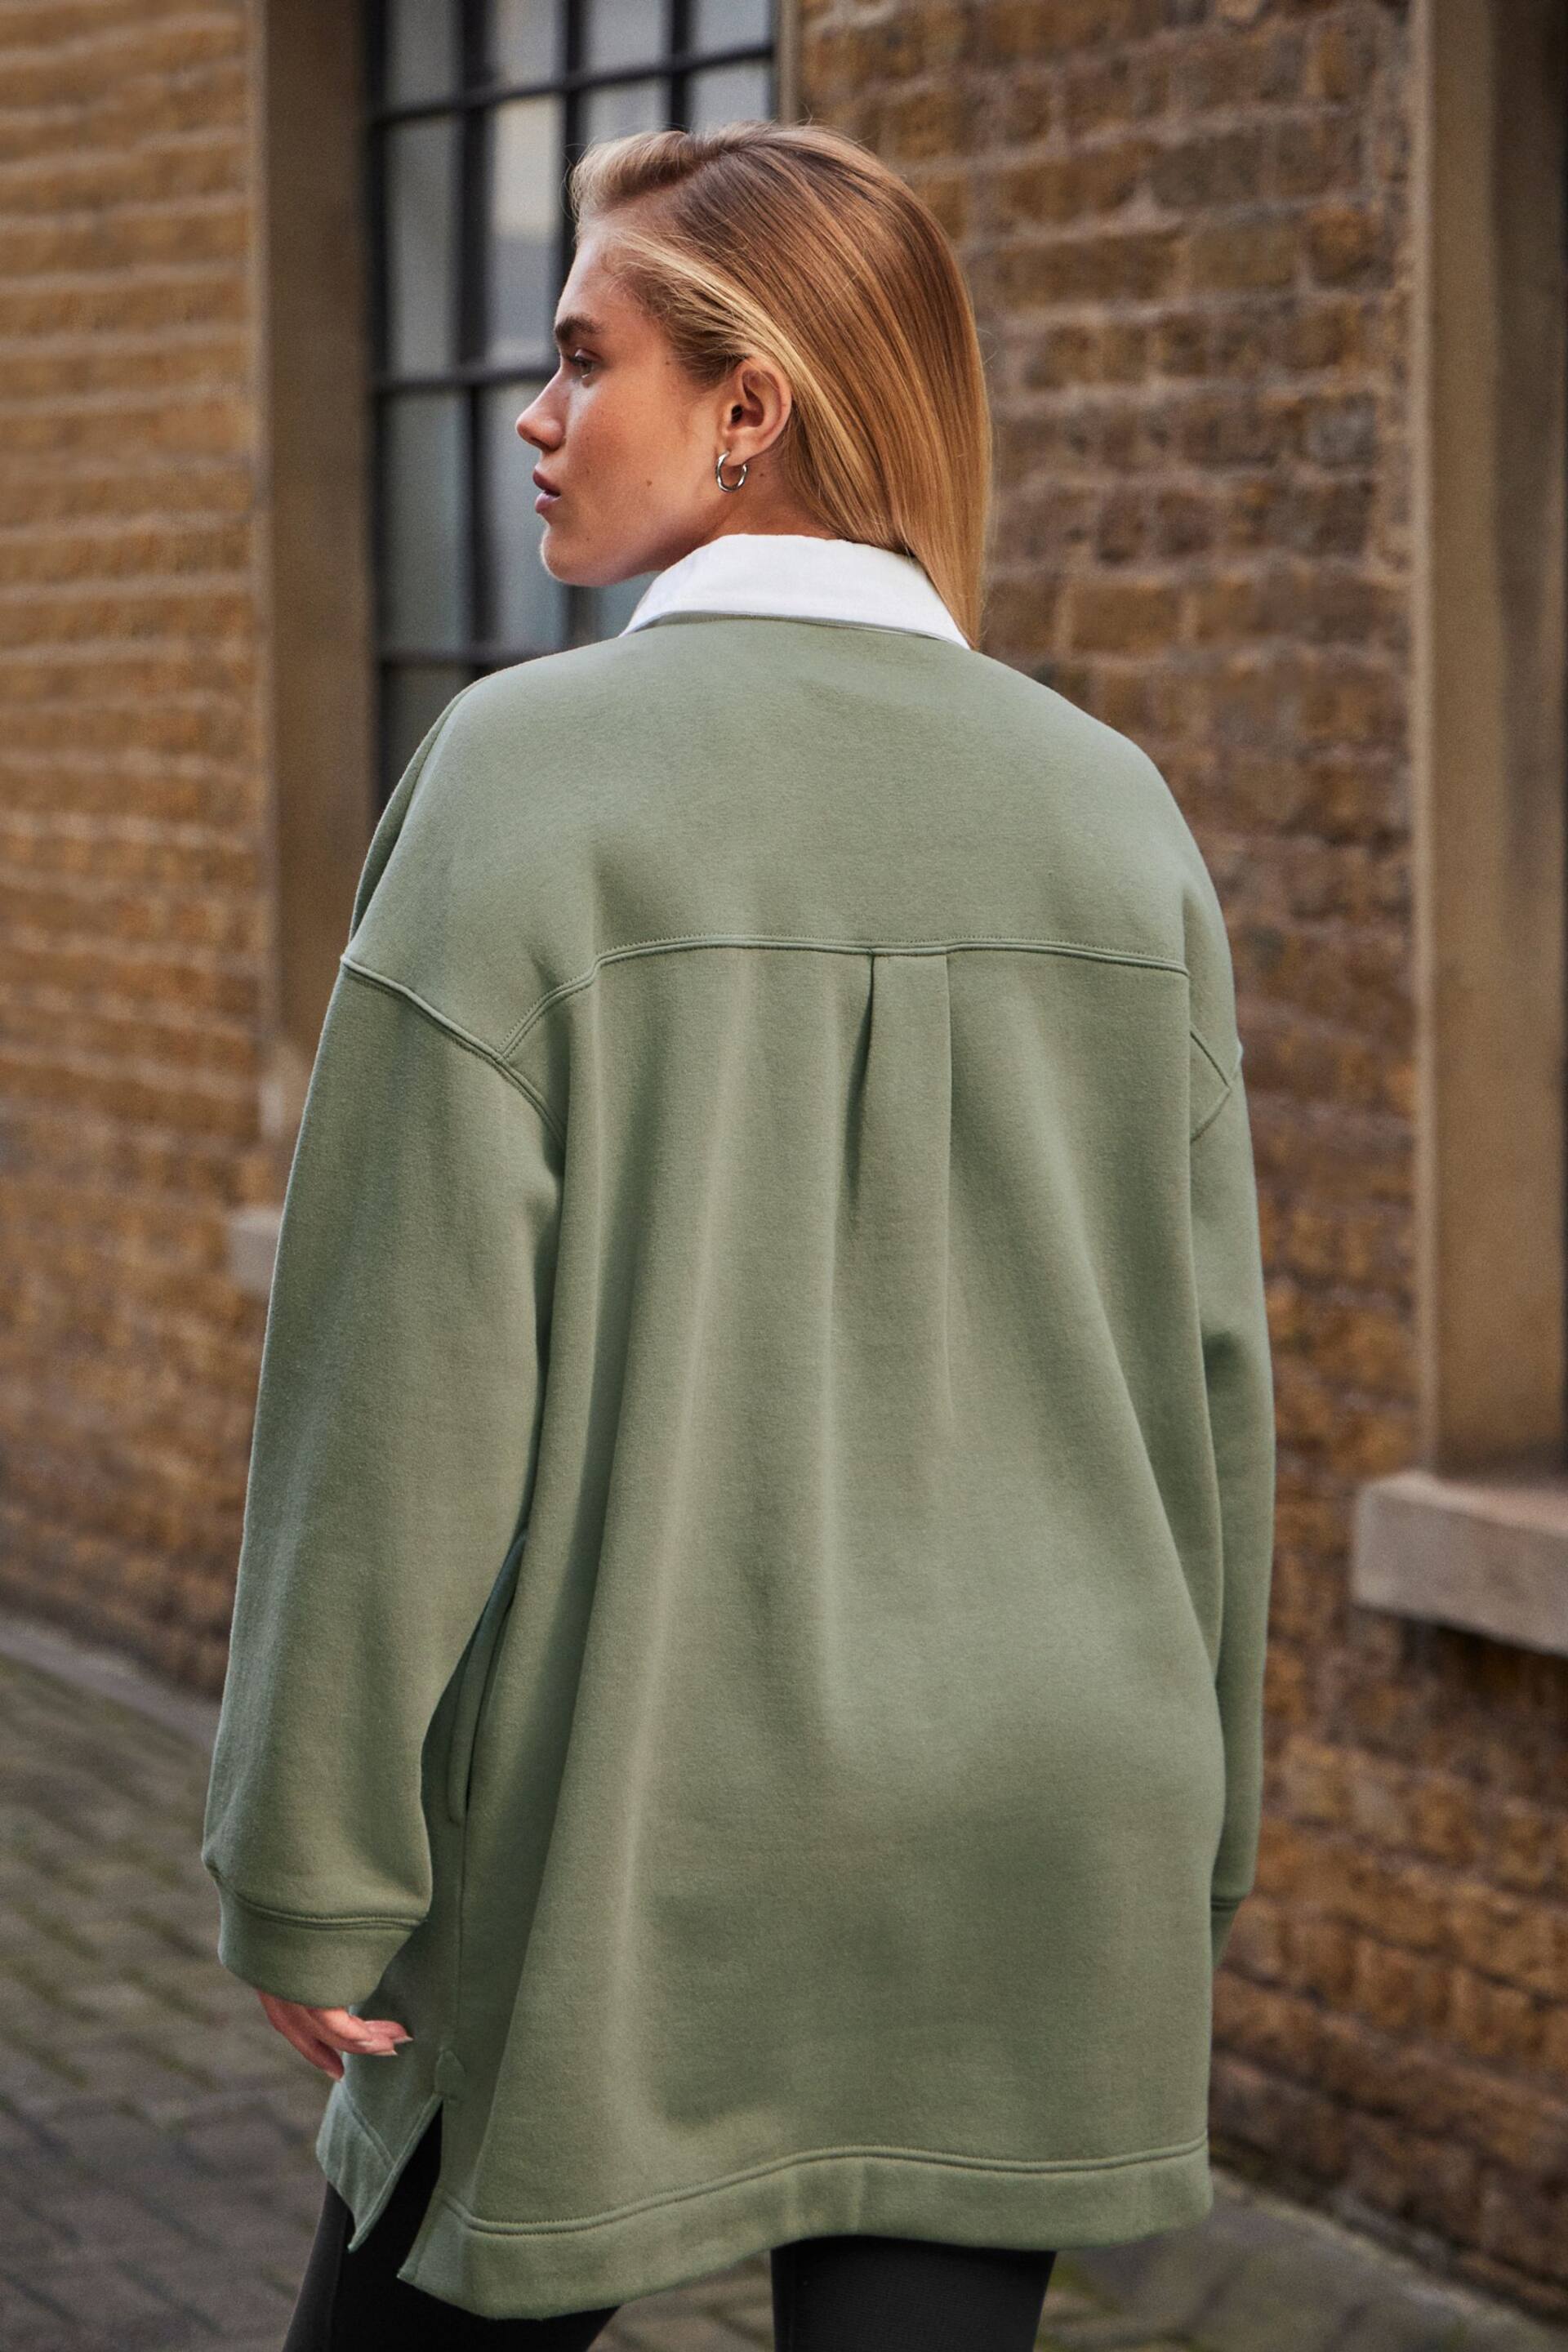 self. Sage Green Rugby Sweat Top - Image 4 of 8